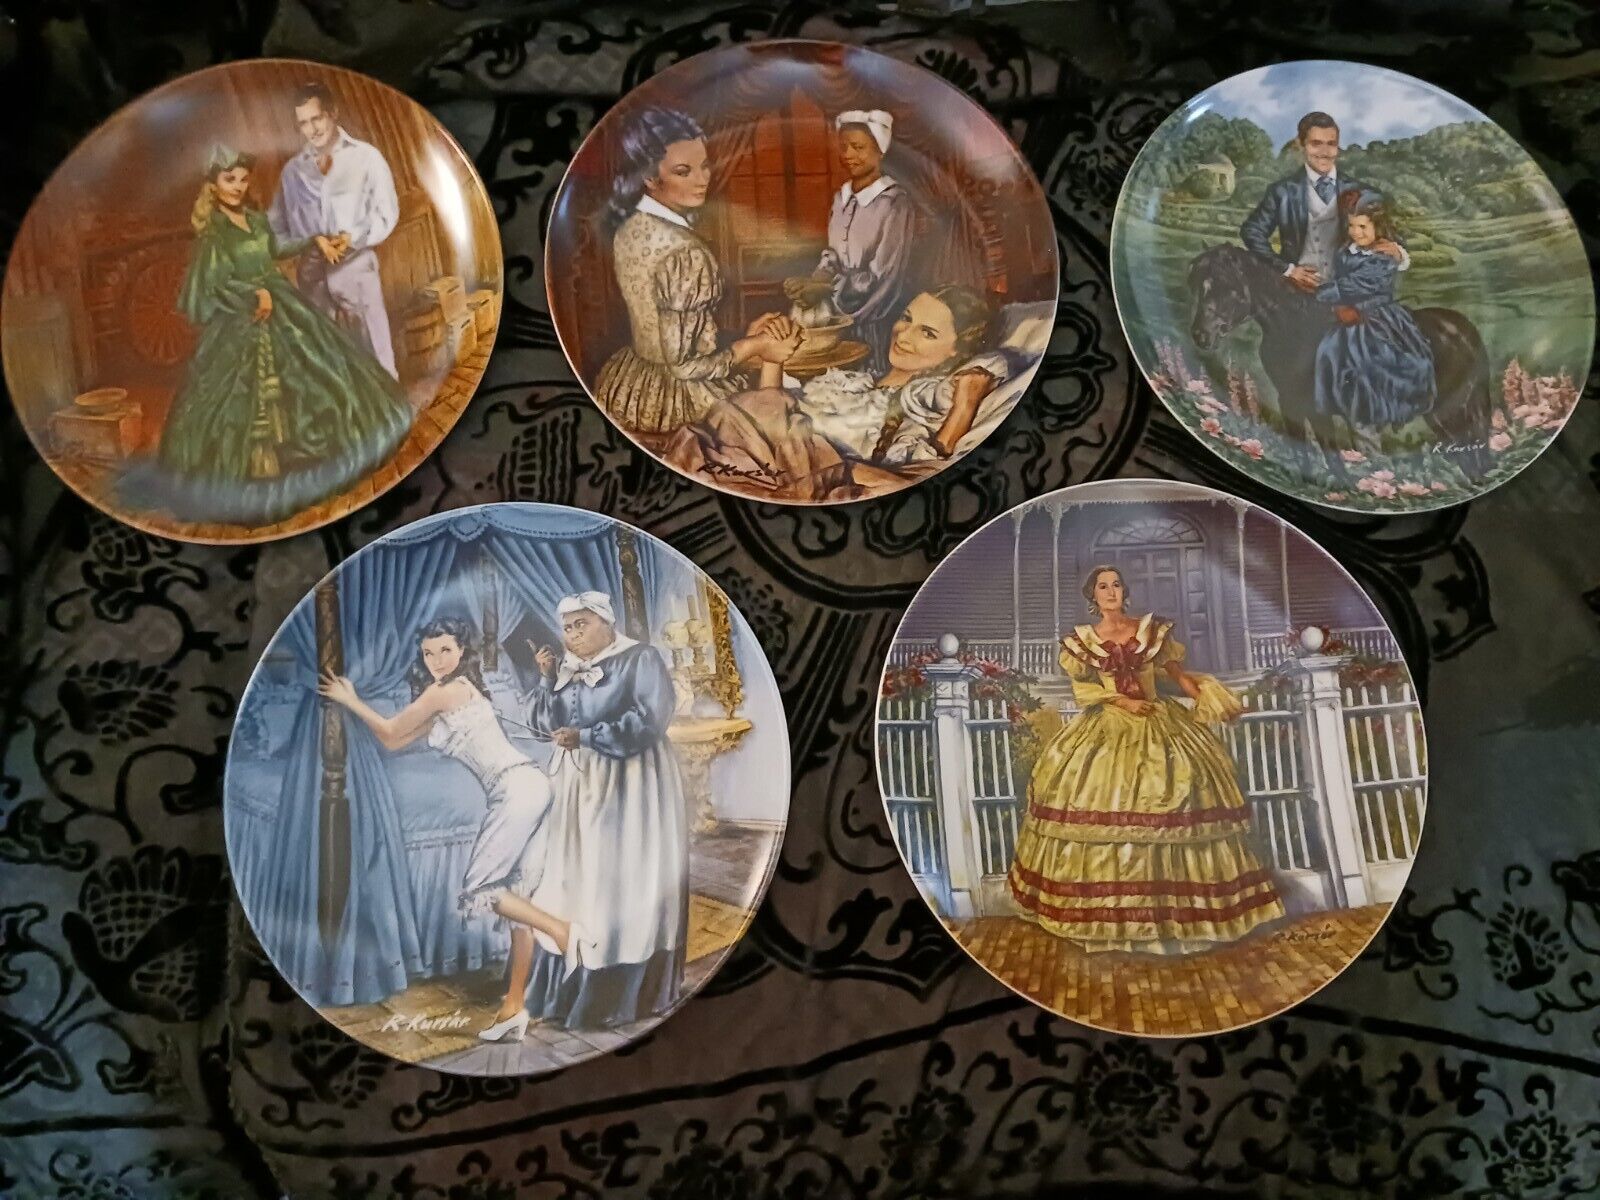 Knowles China - Gone With The Wind Collection Plates - FIVE IN THIS AUCTION EC 